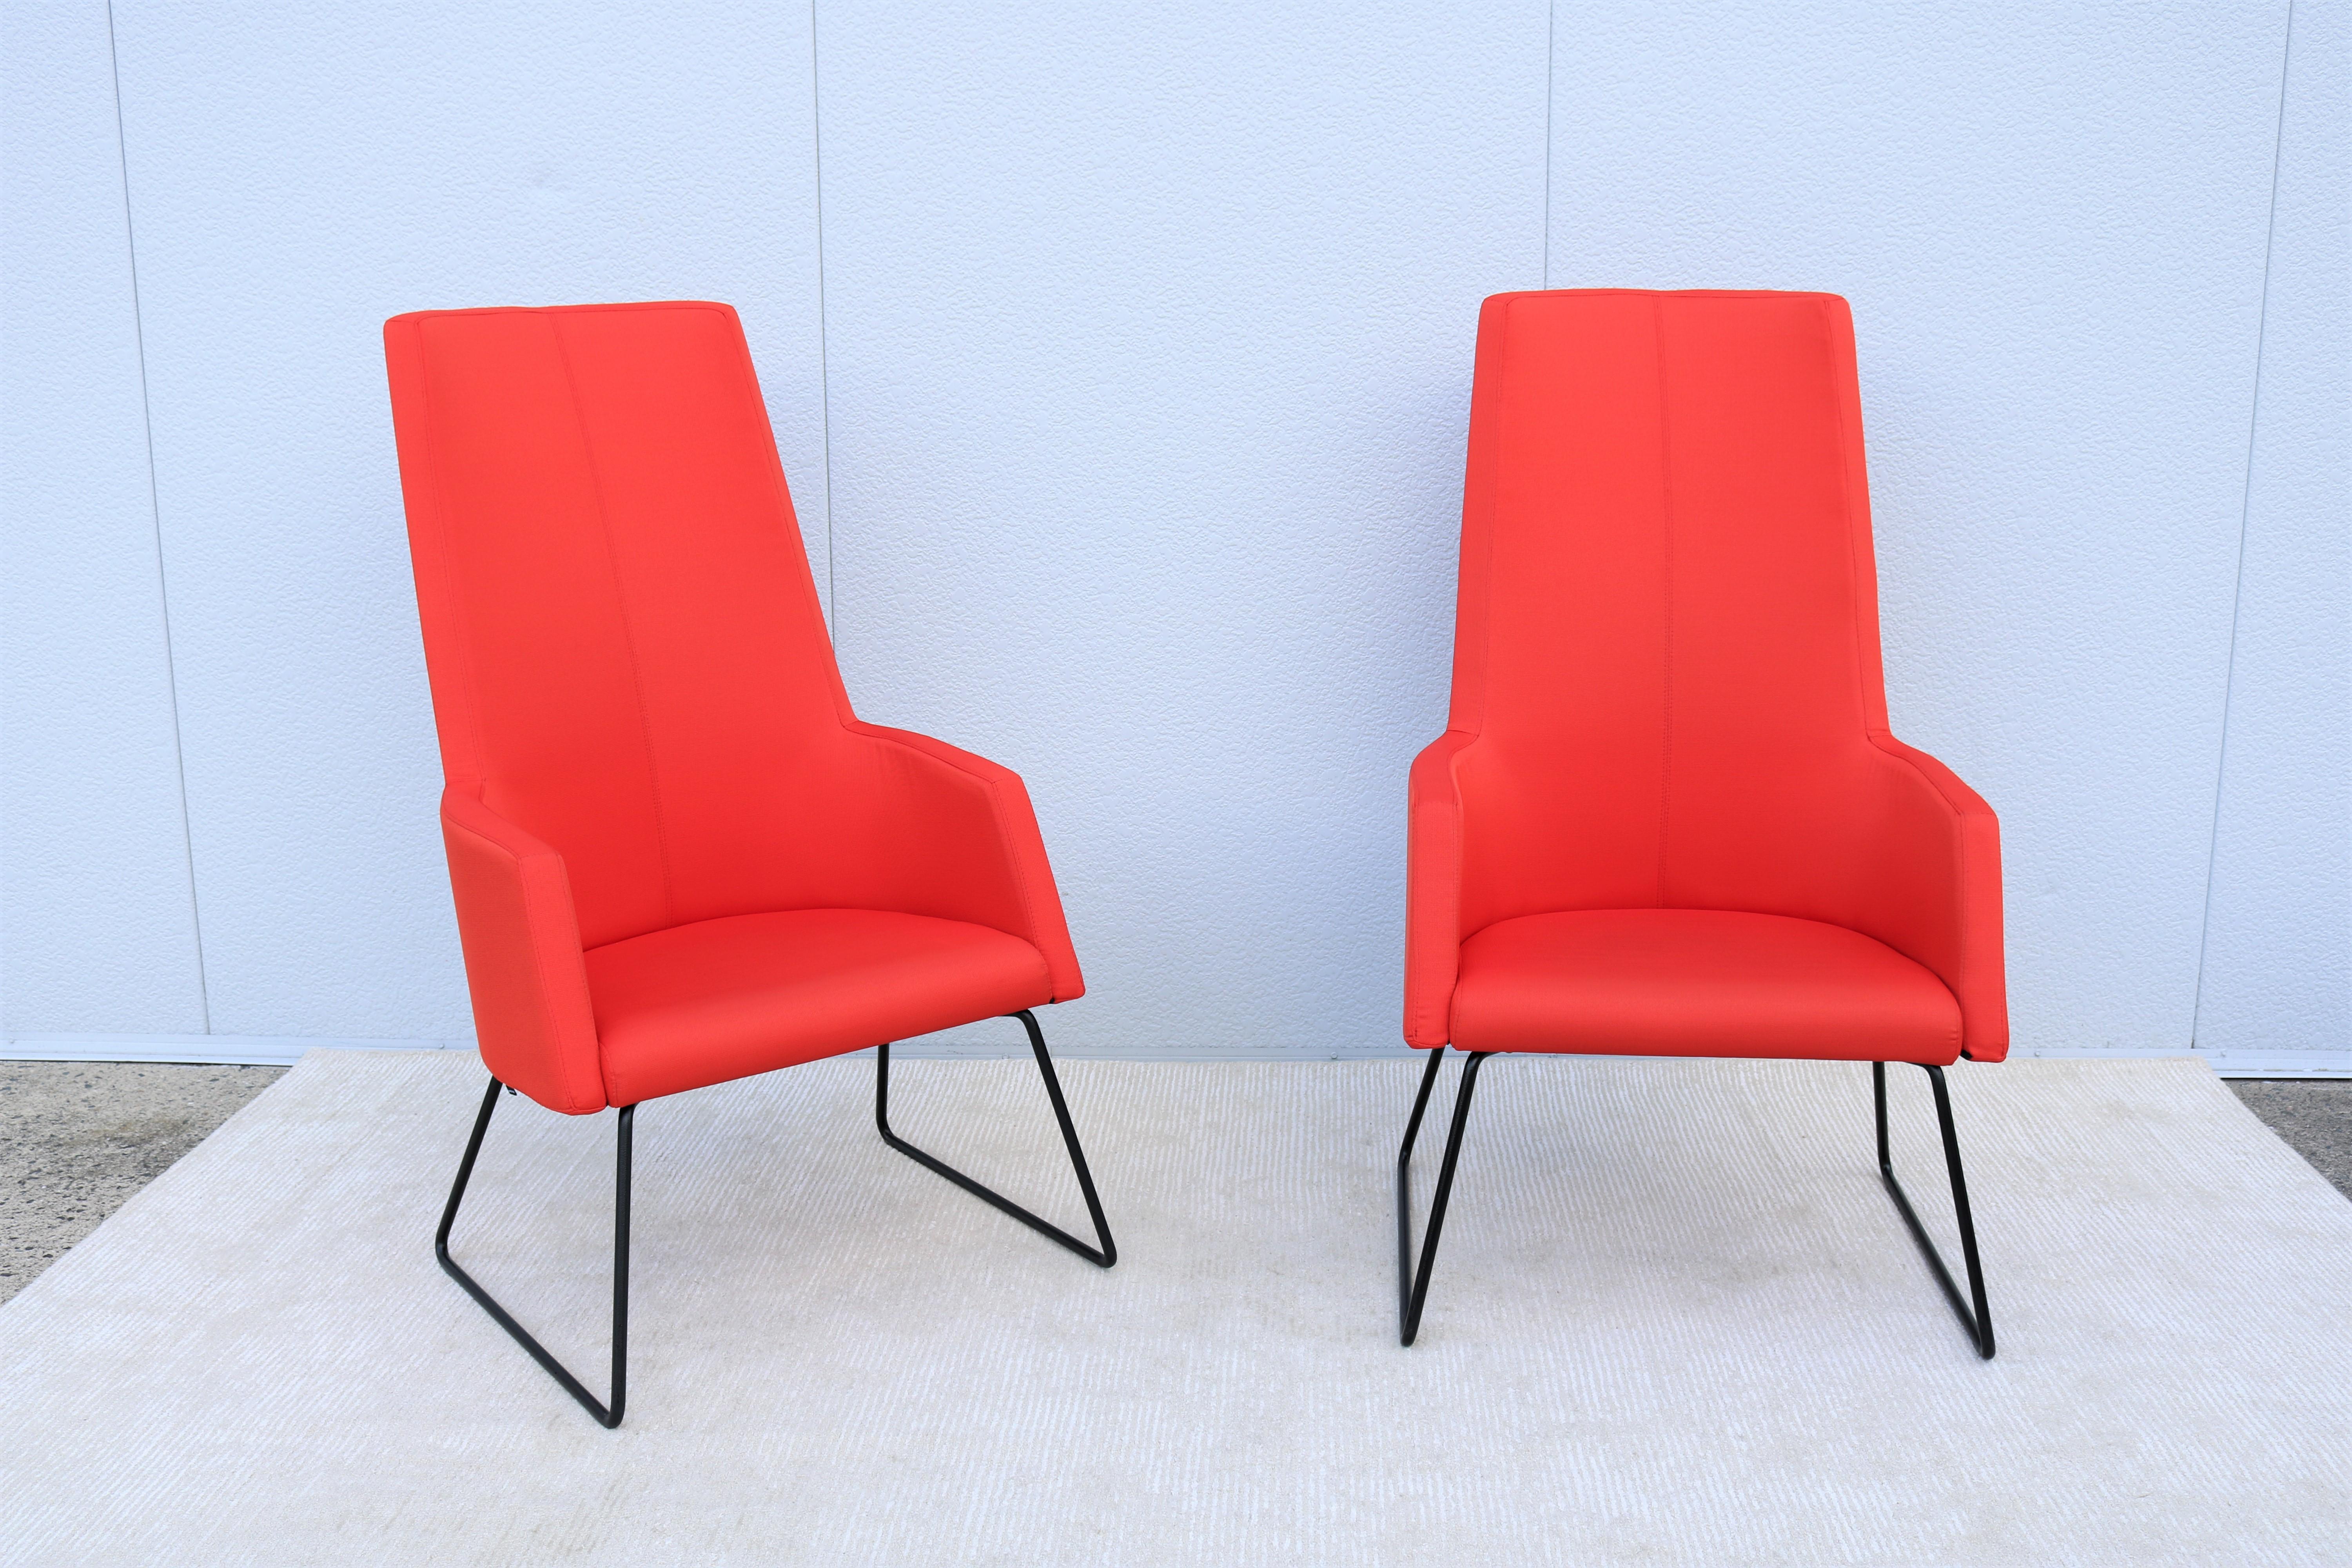 This gracious yet ultra contemporary modern Solo High-back lounge chairs are comfortable and appropriate for residential and commercial use.
The eye-catching bold curves and strong silhouette is elegant, inviting and has presence in its